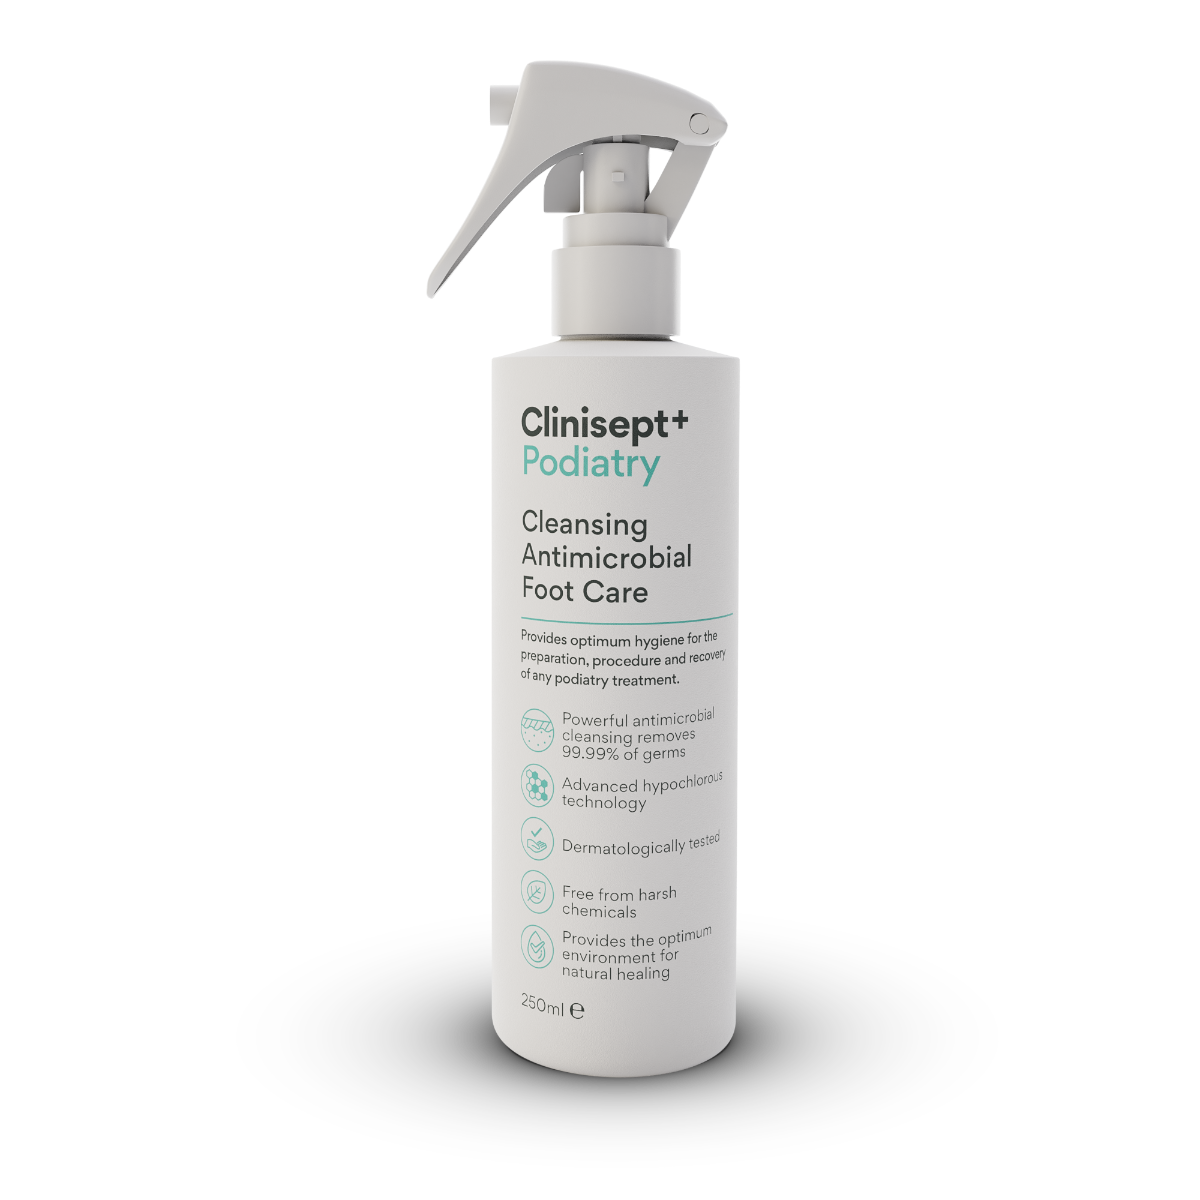 Clinisept+ Podiatry 250ml Trigger Spray Bottle (Professional & Home use)